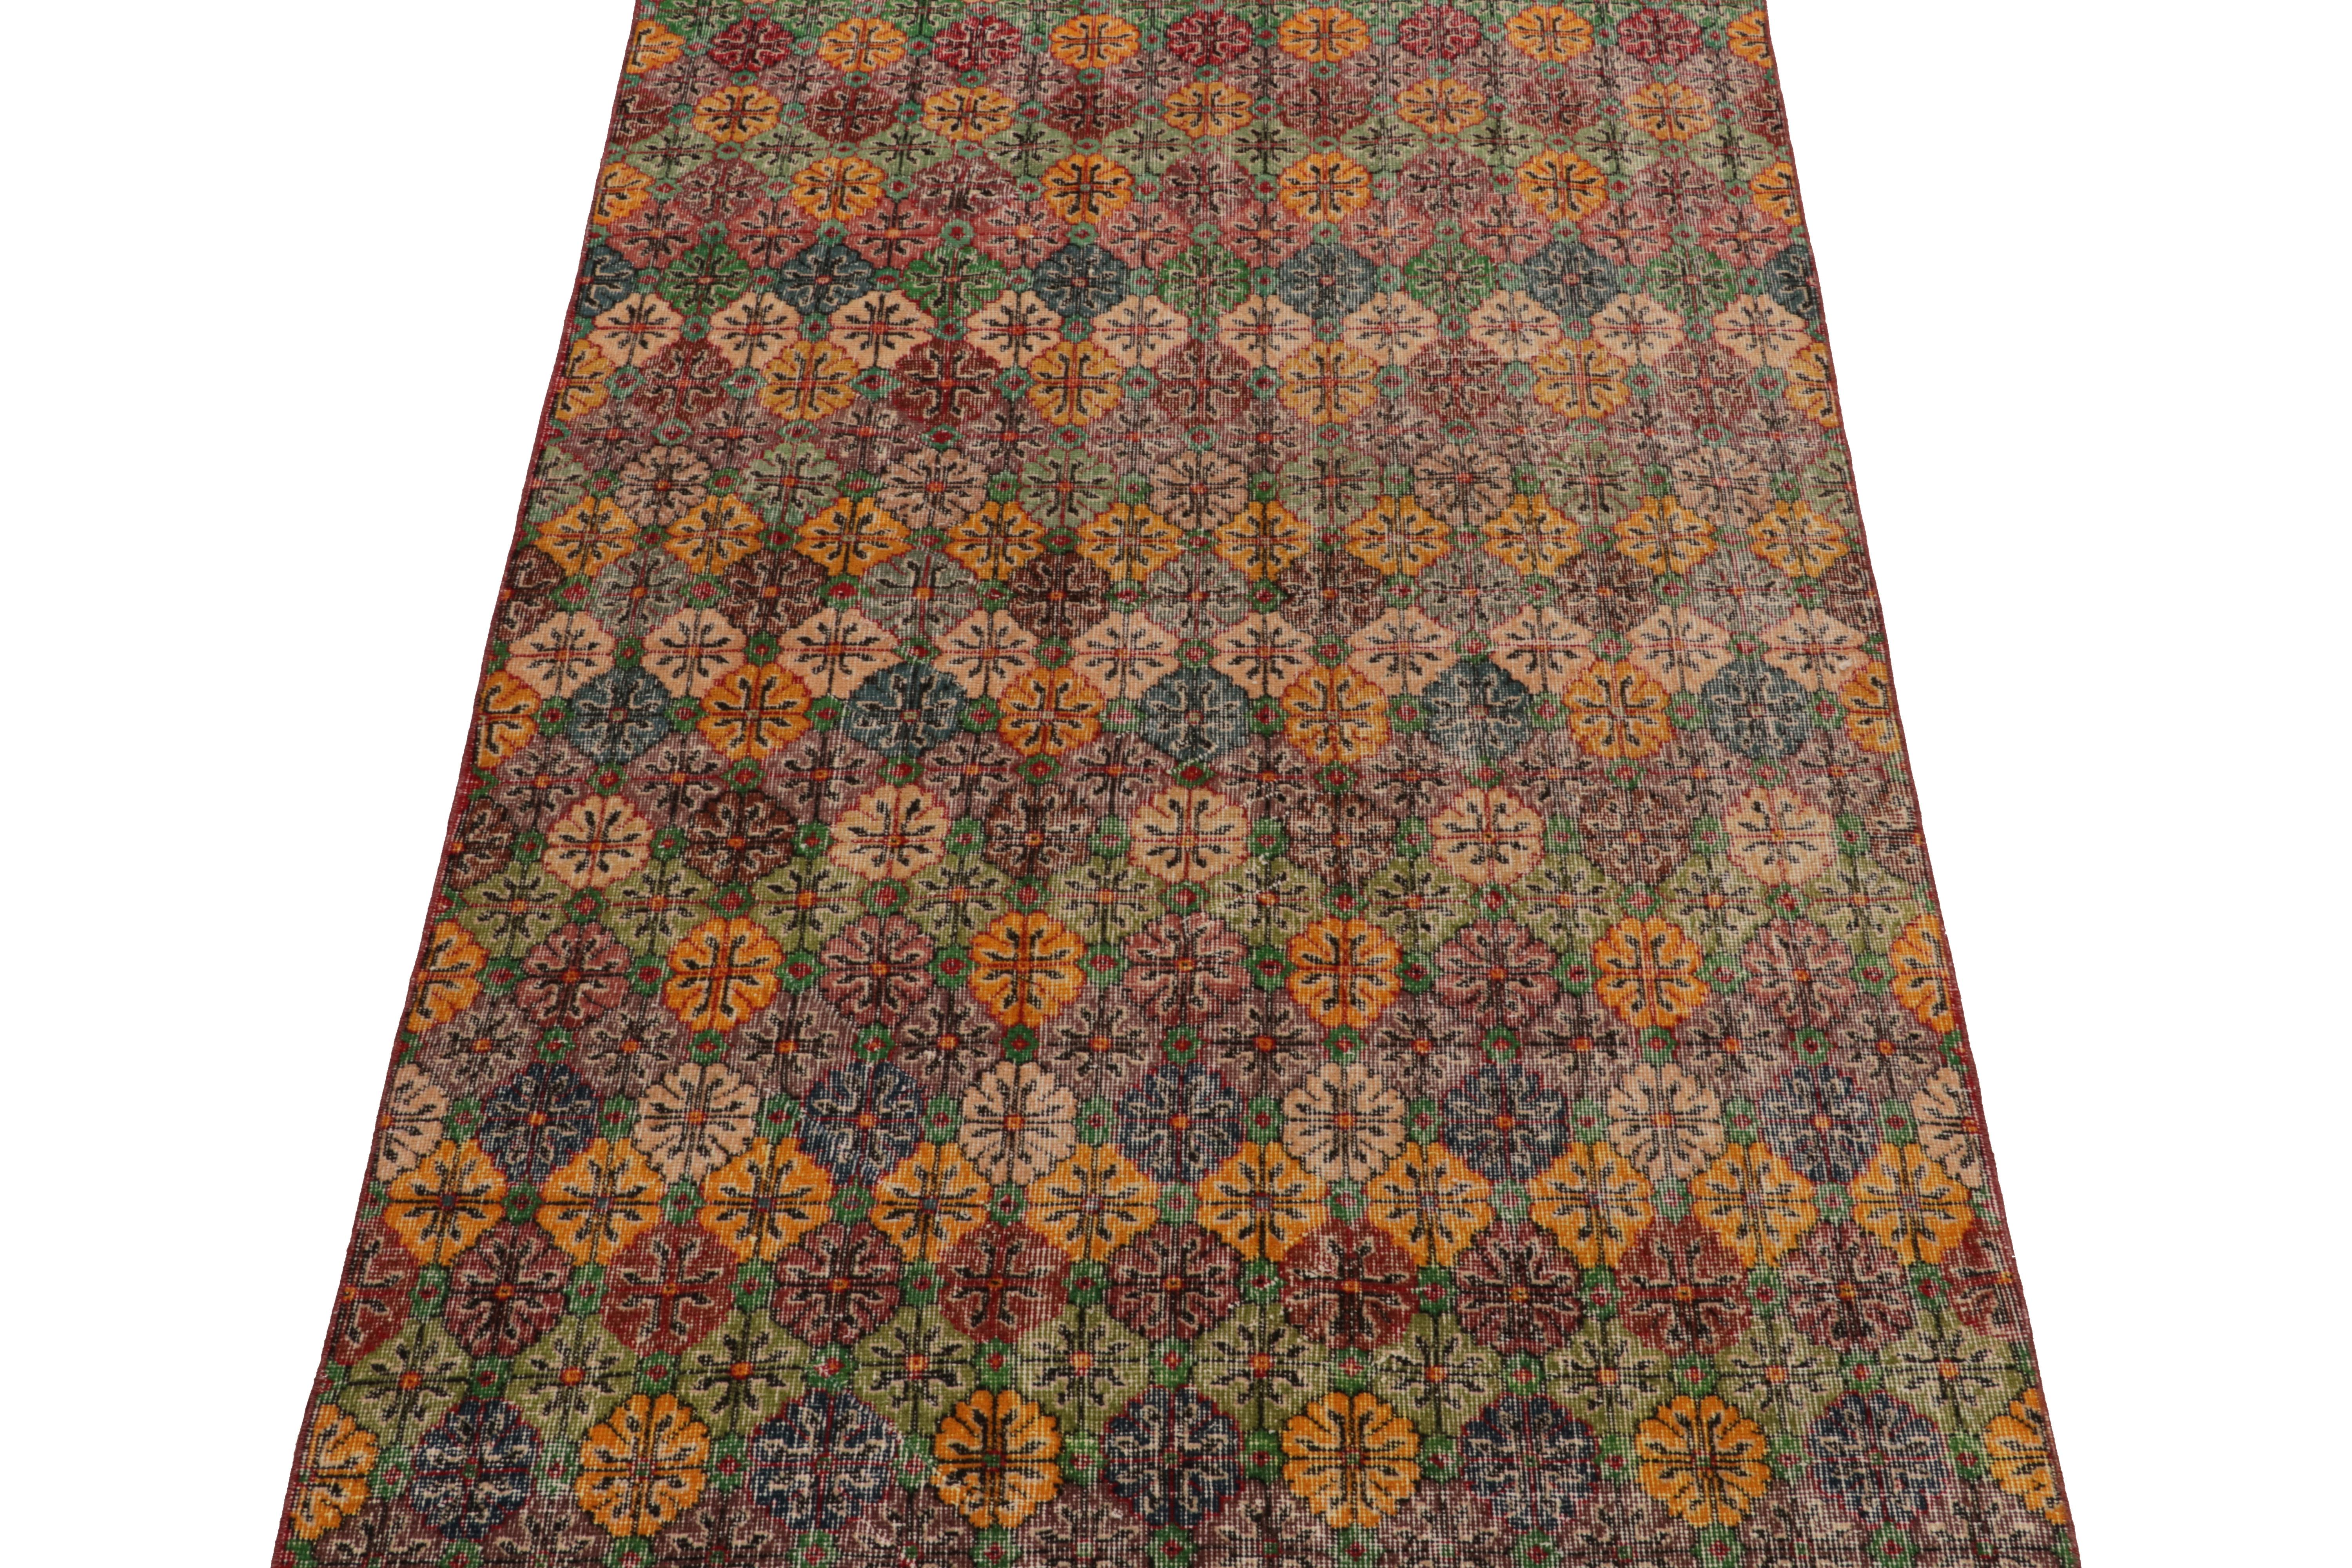 Hand-knotted in wool, a 5x8 vintage rug from an acclaimed Turkish designer entering Rug & Kilim’s commemorative Mid-Century Pasha Collection. This dedicated piece enjoys an art deco style with a fabulously unique colorway for this geometric pattern